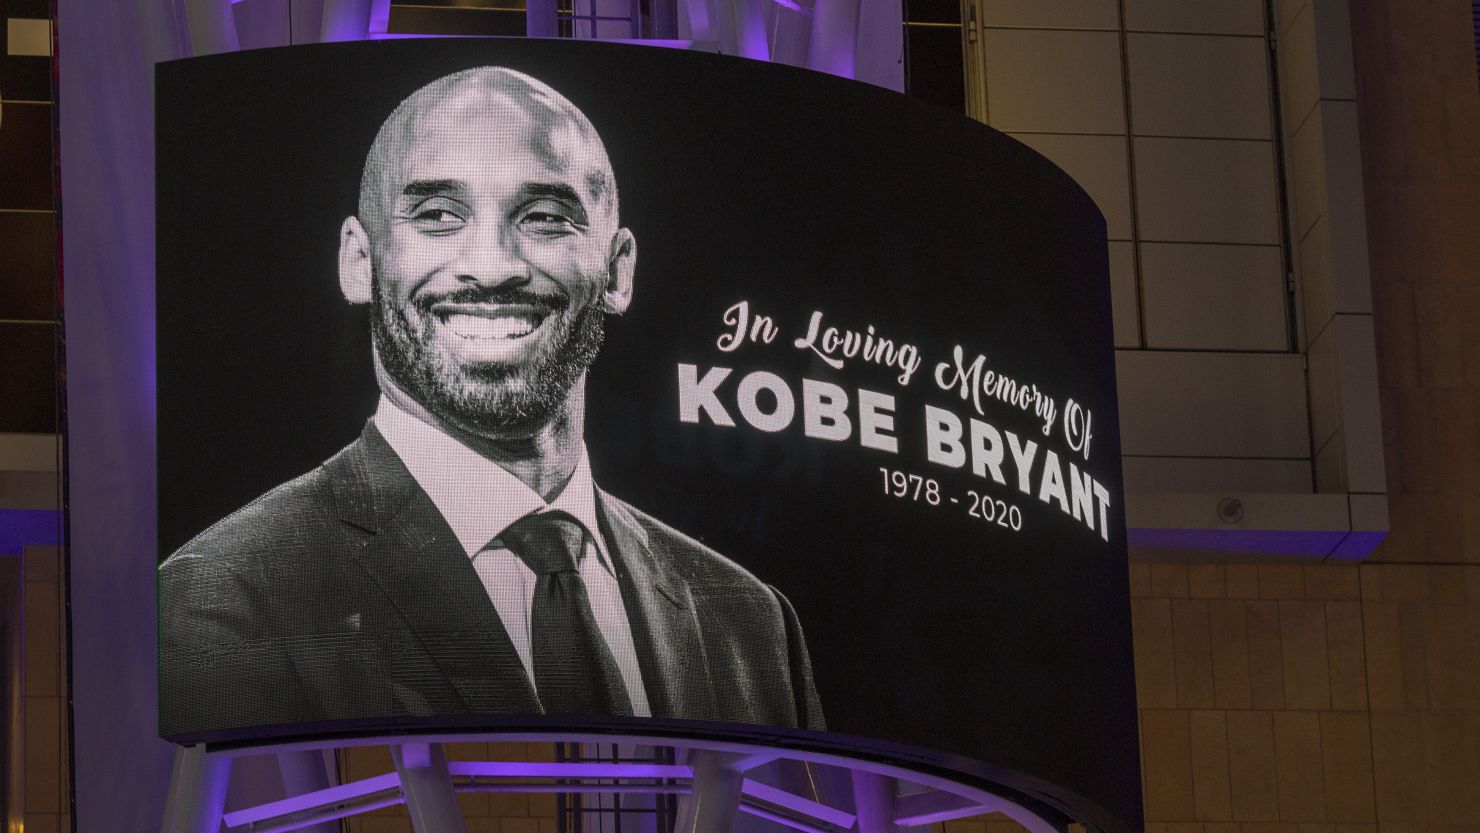 Former NBA star Kobe Bryant, who died in a helicopter crash in Calabasas, California is honored for his legacy.